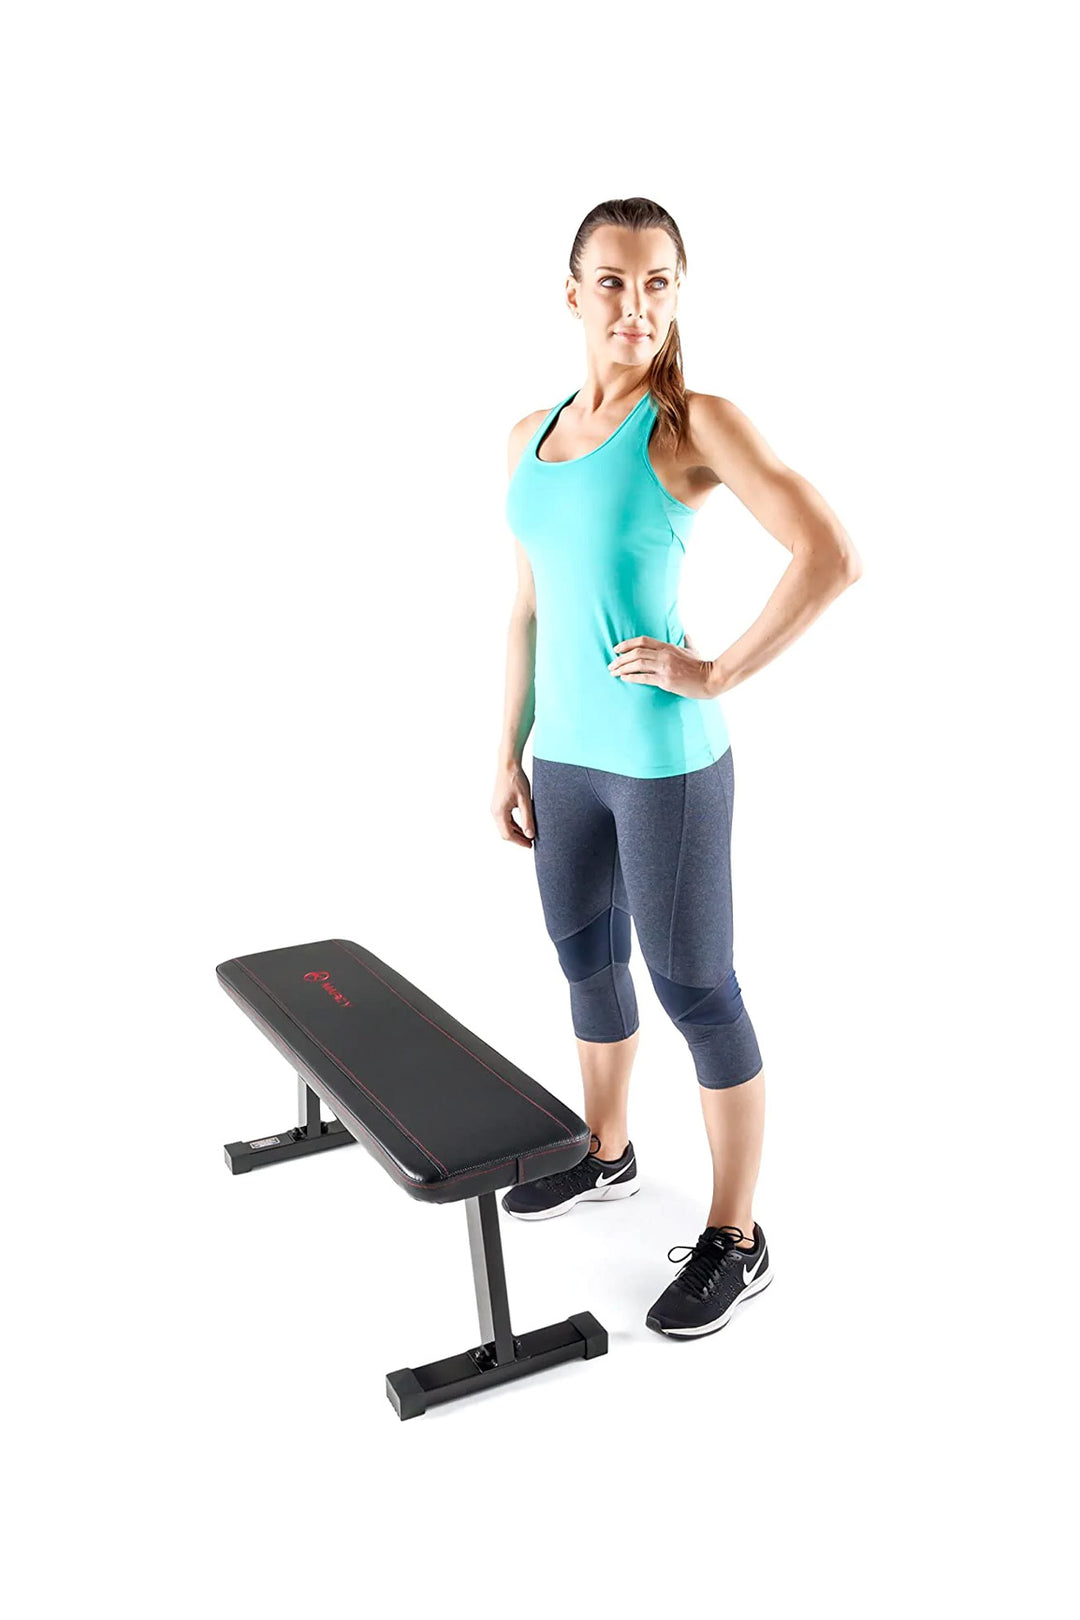 Lifestyle image of woman standing with Marcy flat bench